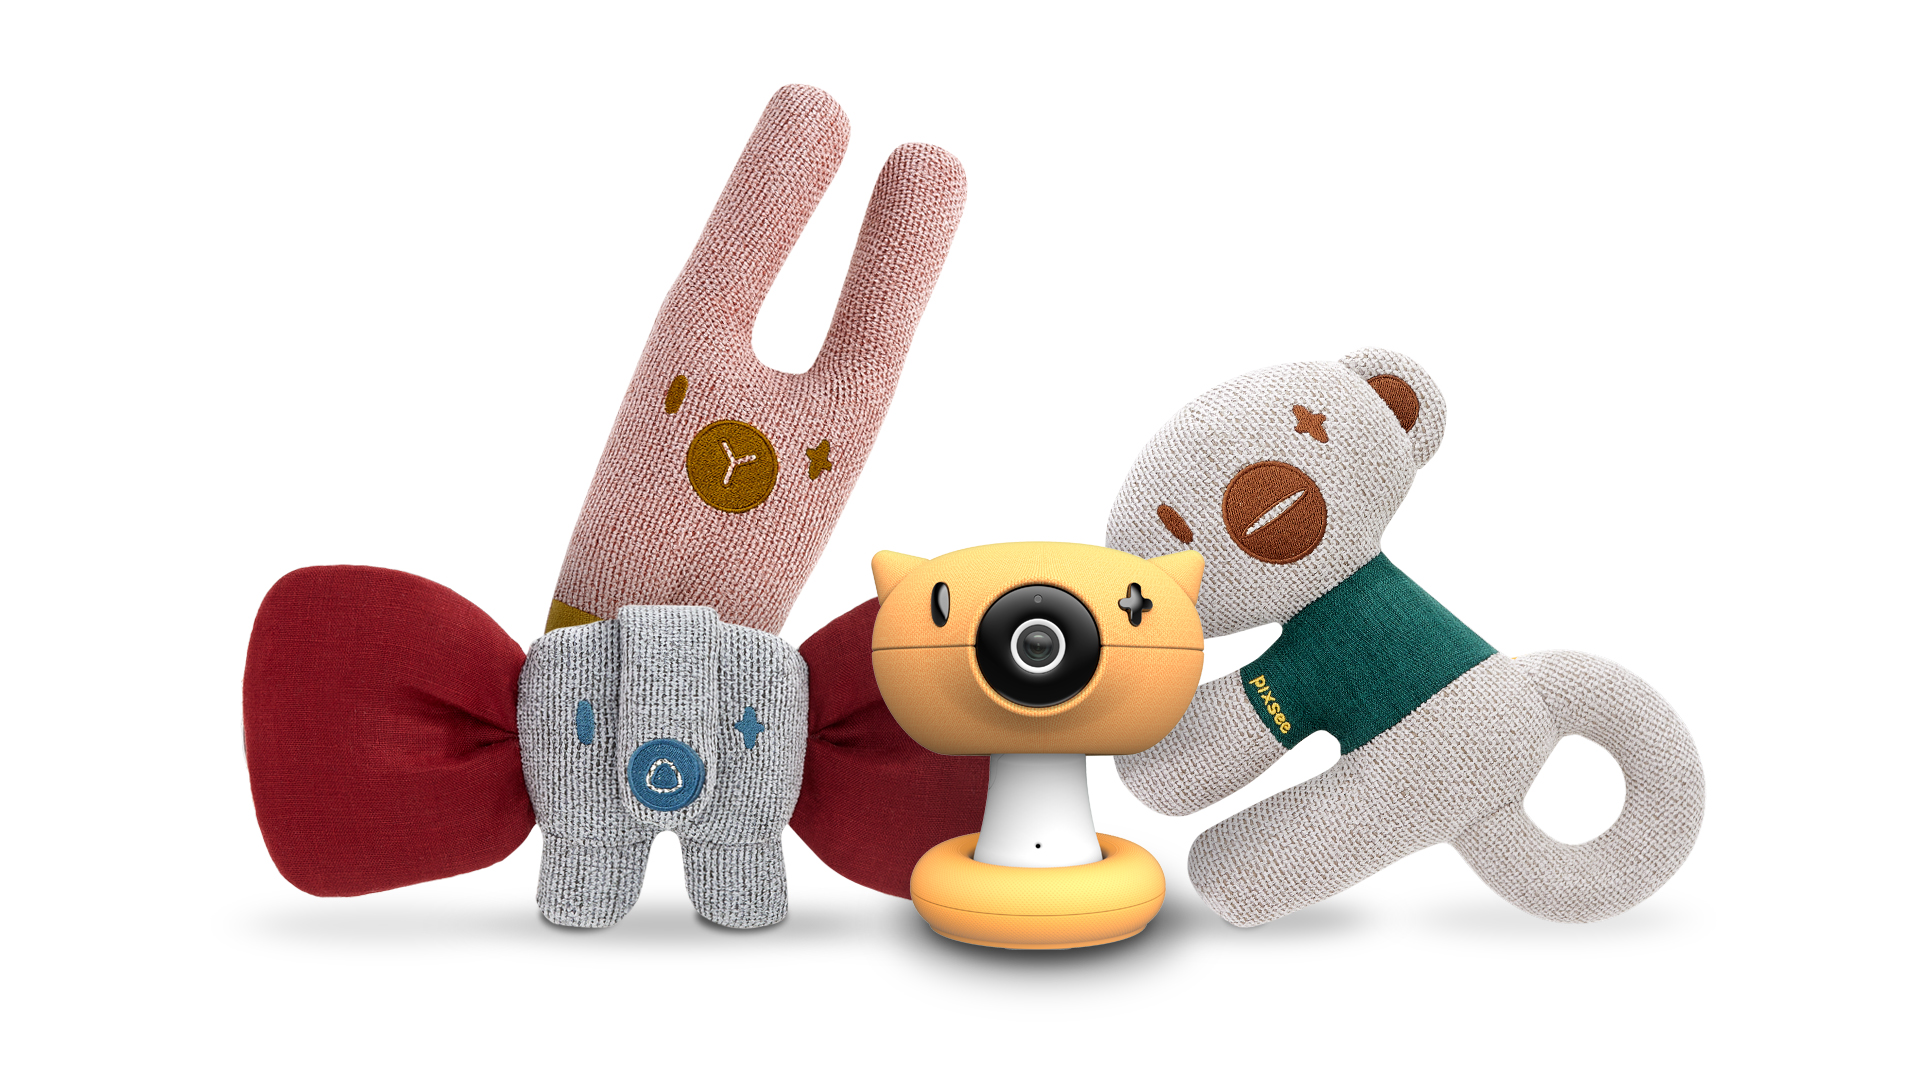 Pixsee Play and Pixsee Friends Smart Baby Camera and AI-linked Toy Set / SHENNONA Co., Ltd.